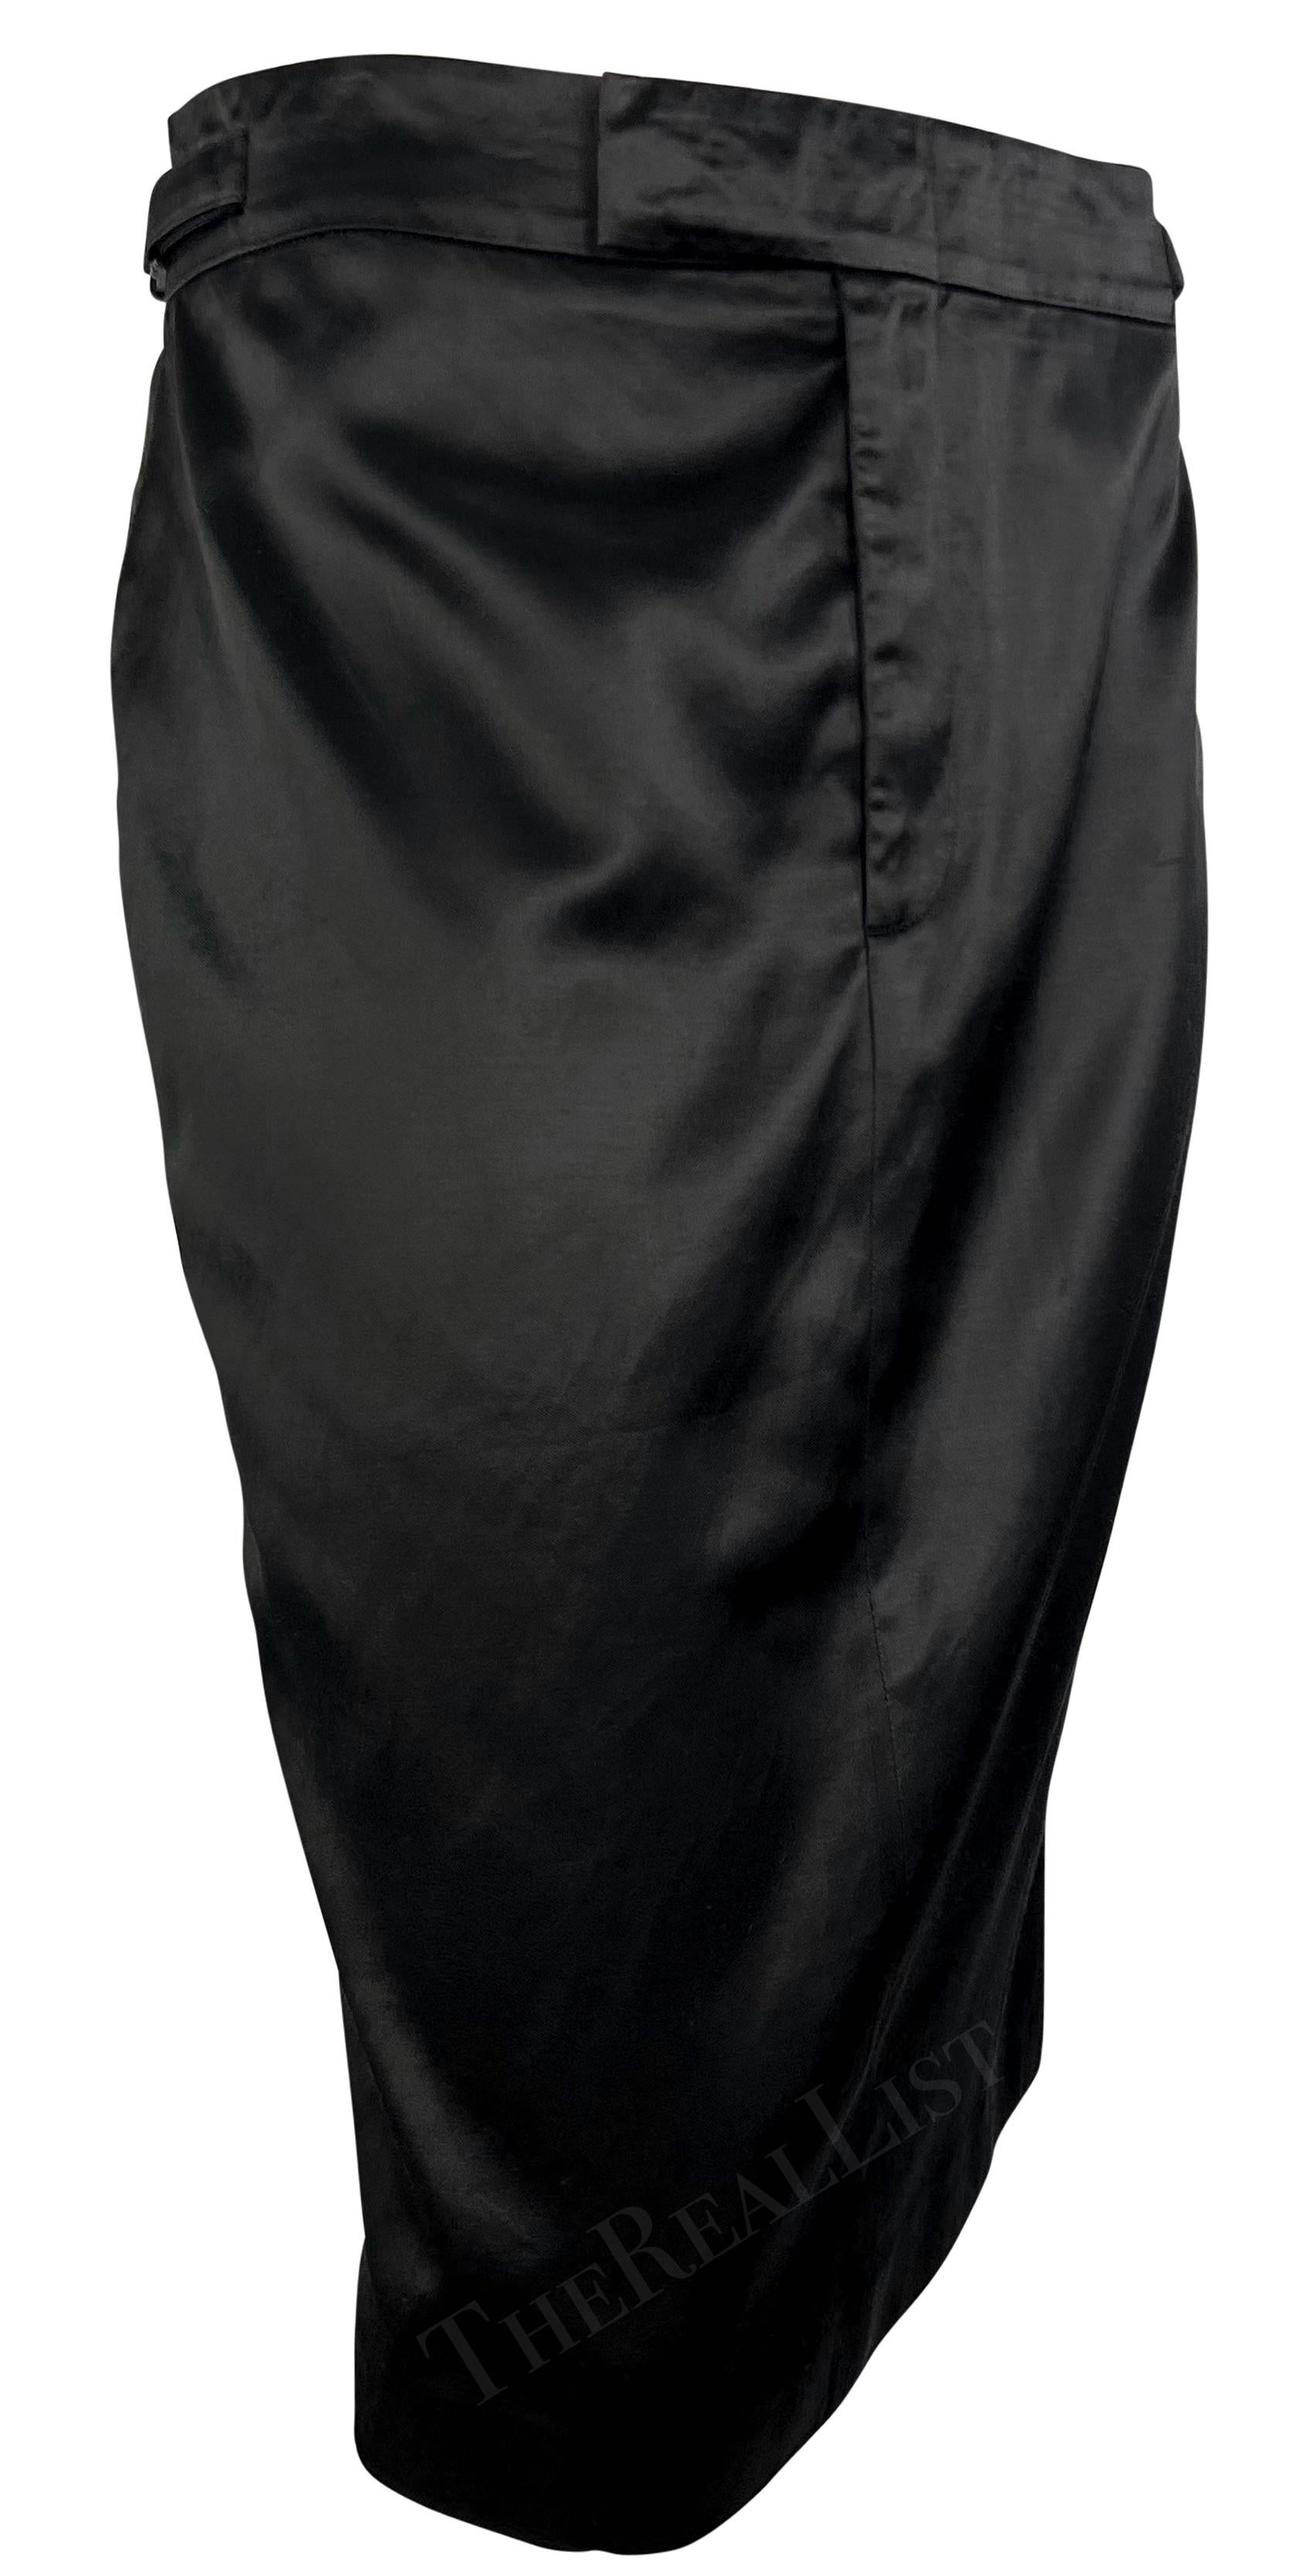 S/S 2001 Gucci by Tom Ford Black Satin Belted Runway Pencil Skirt  For Sale 3